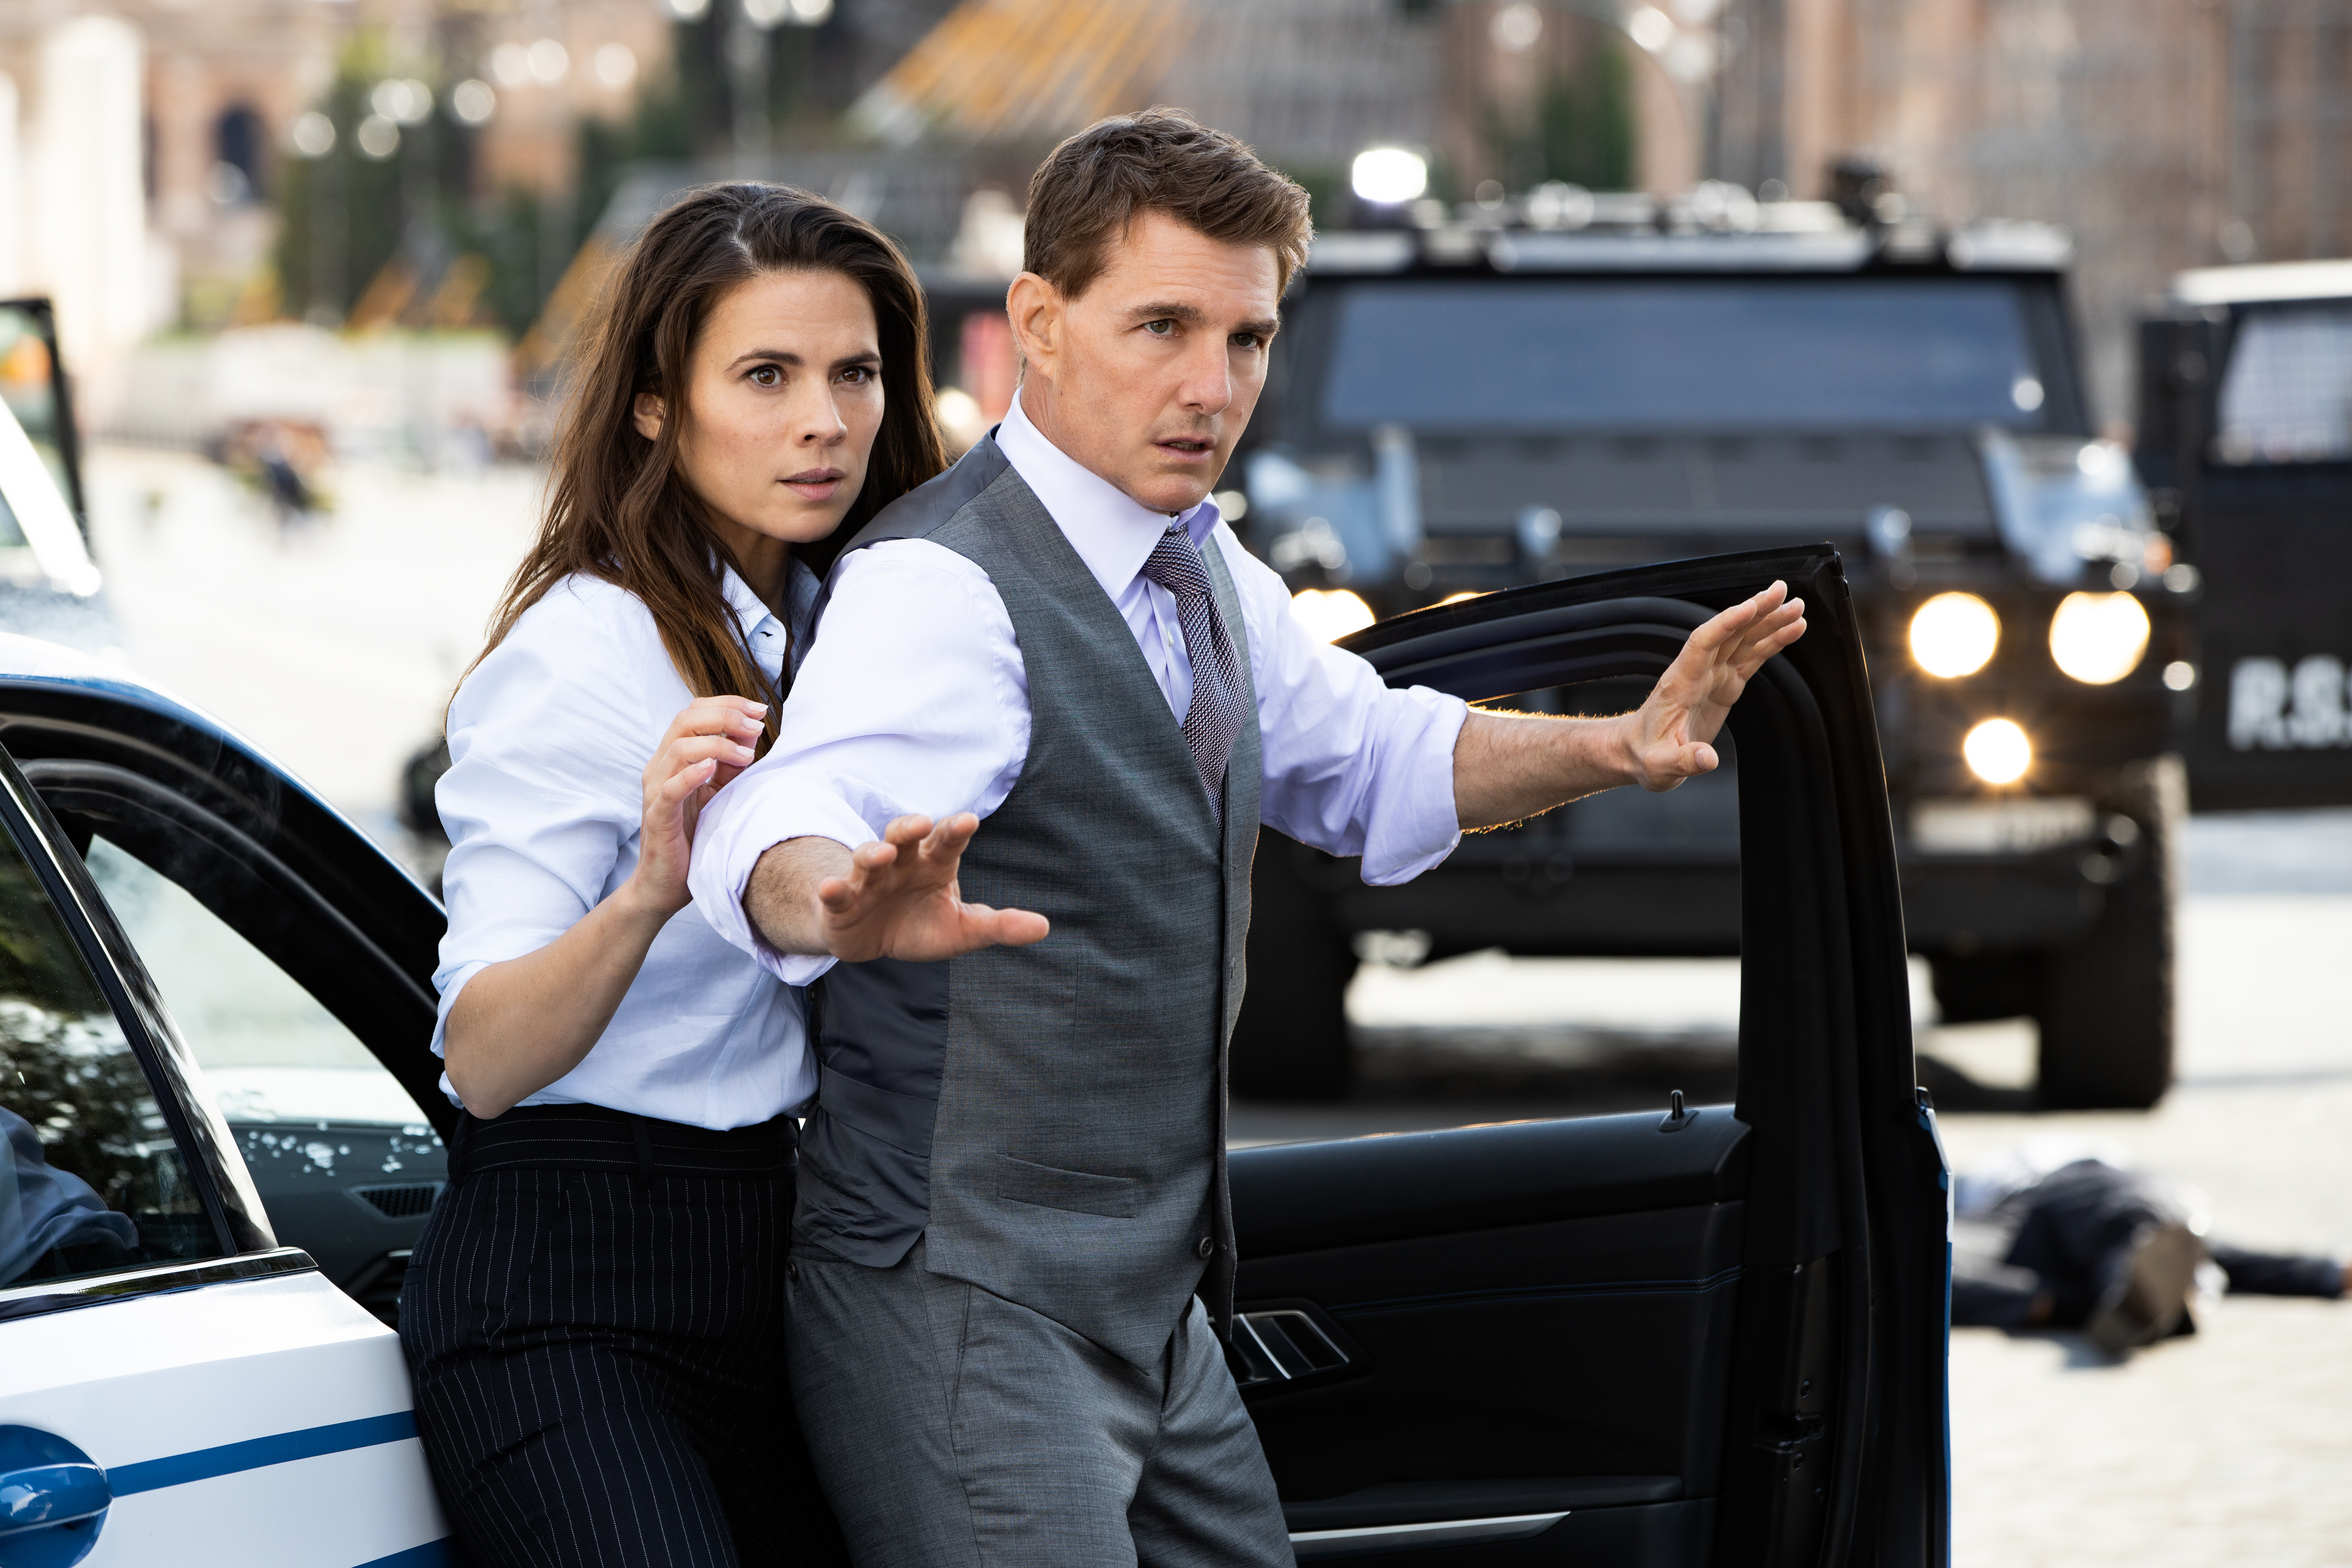 Tom Cruise stands up with his hands raised next to a car with Hayley Atwell standing nervously behind him in a photo from Mission: Impossible - Dead Reckoning Part 1